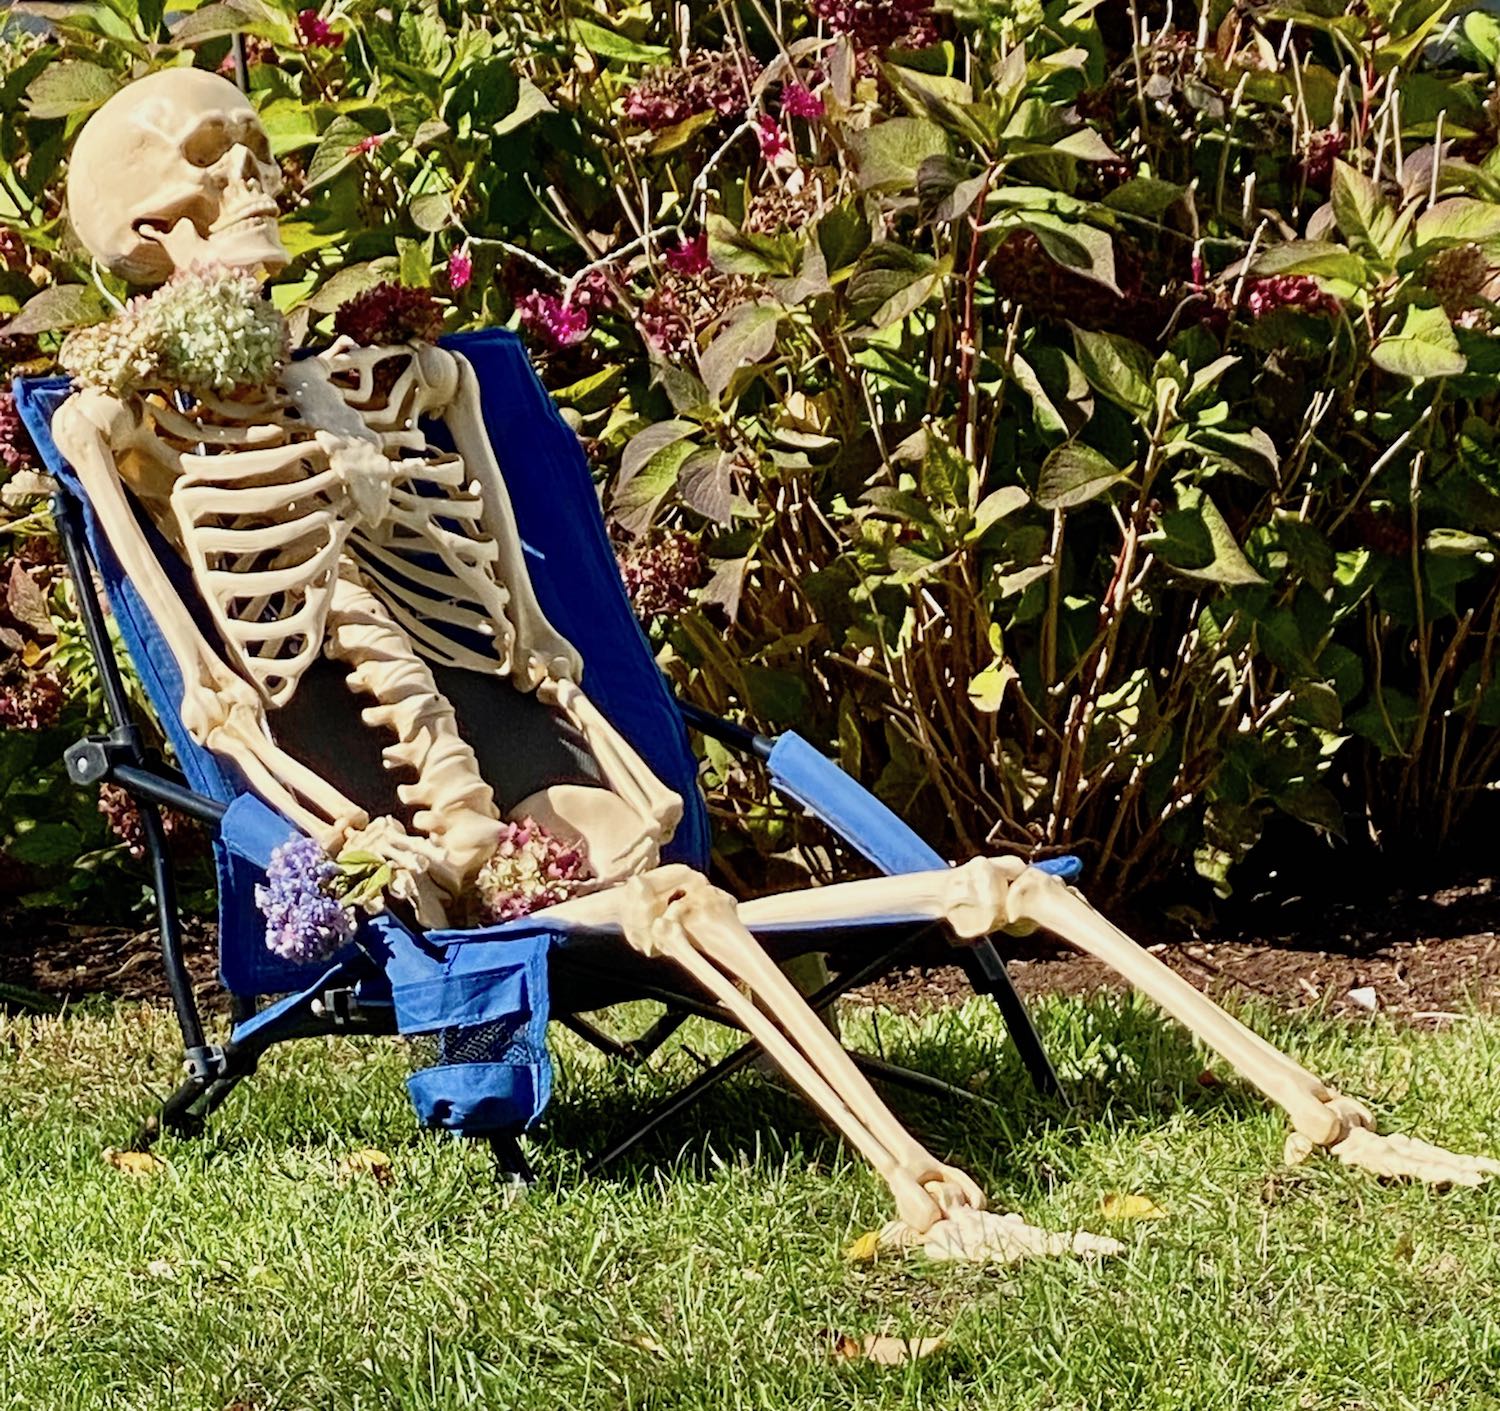 It's the weekend! Number 269, Skeleton Adorned with Hydrangea Blooms